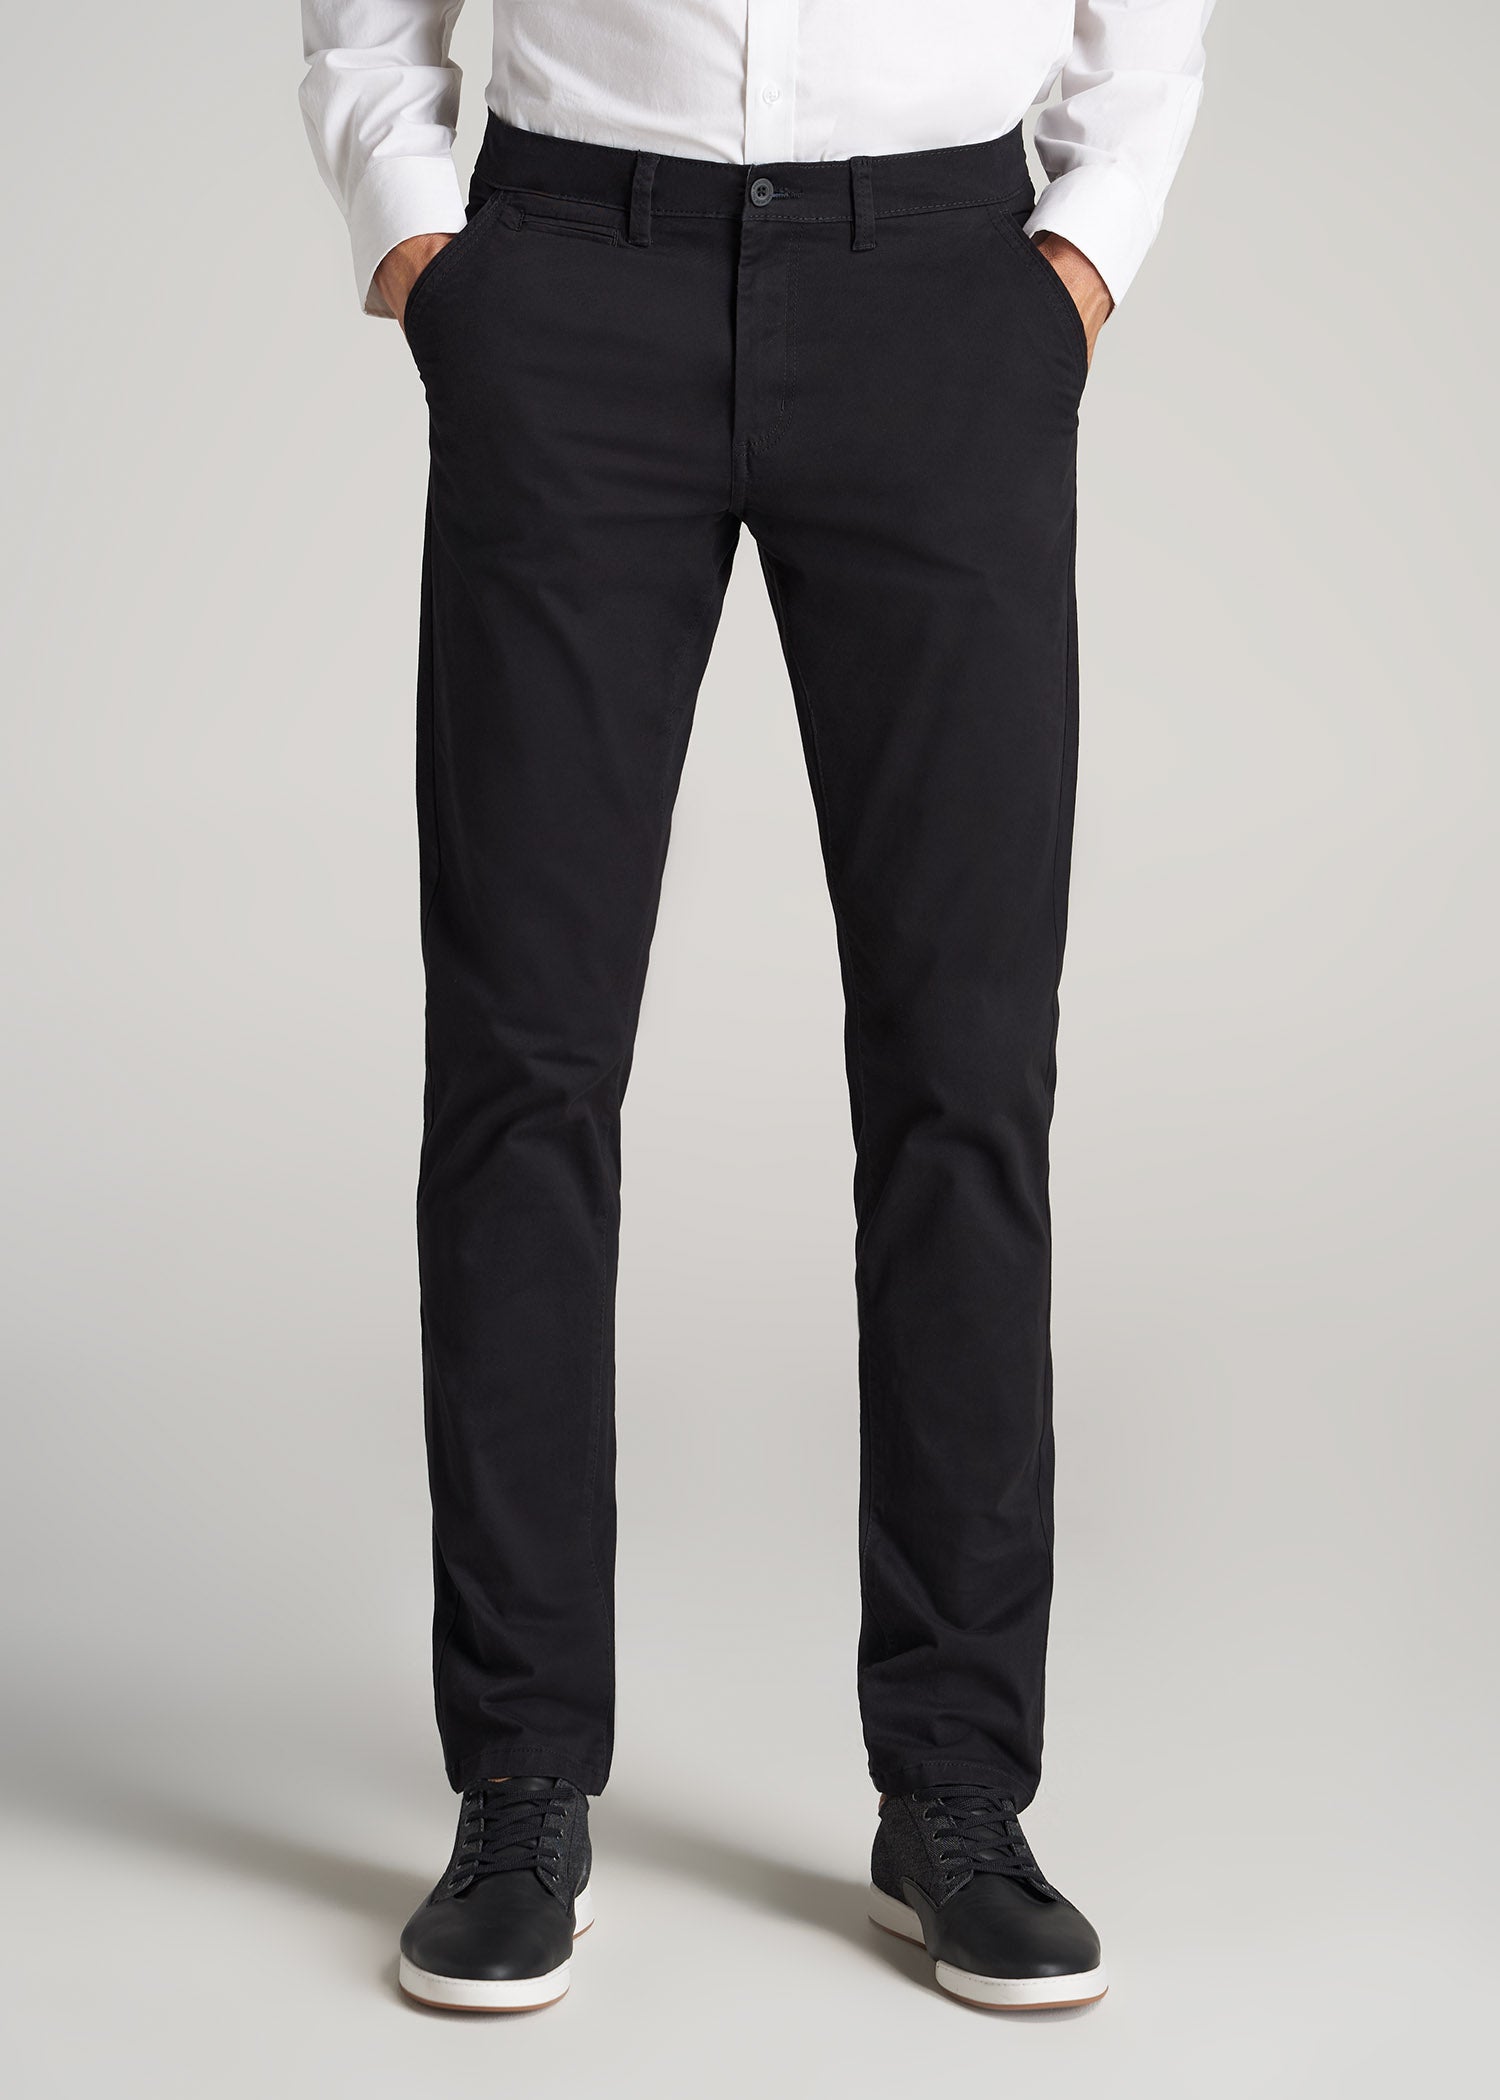 Tall guy wearing American Tall's Tall Carman Tapered Fit Chino Pant in the color Black.